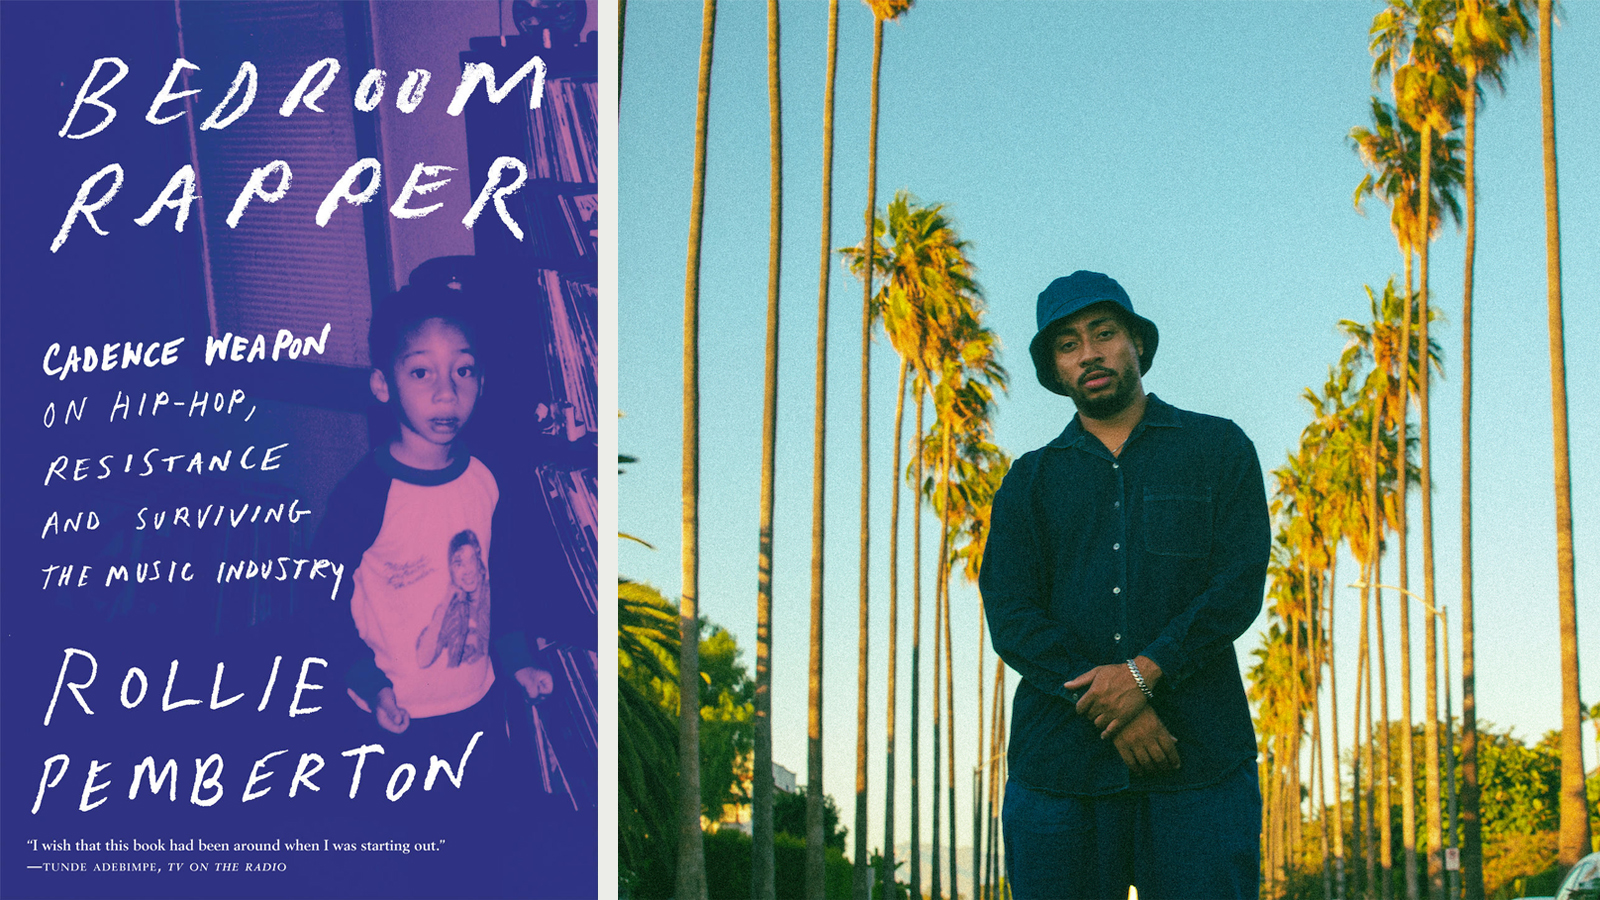 Two images are displayed: the Bedroom Rapper book cover and a photo of Cadence Weapon surrounded by palm trees.